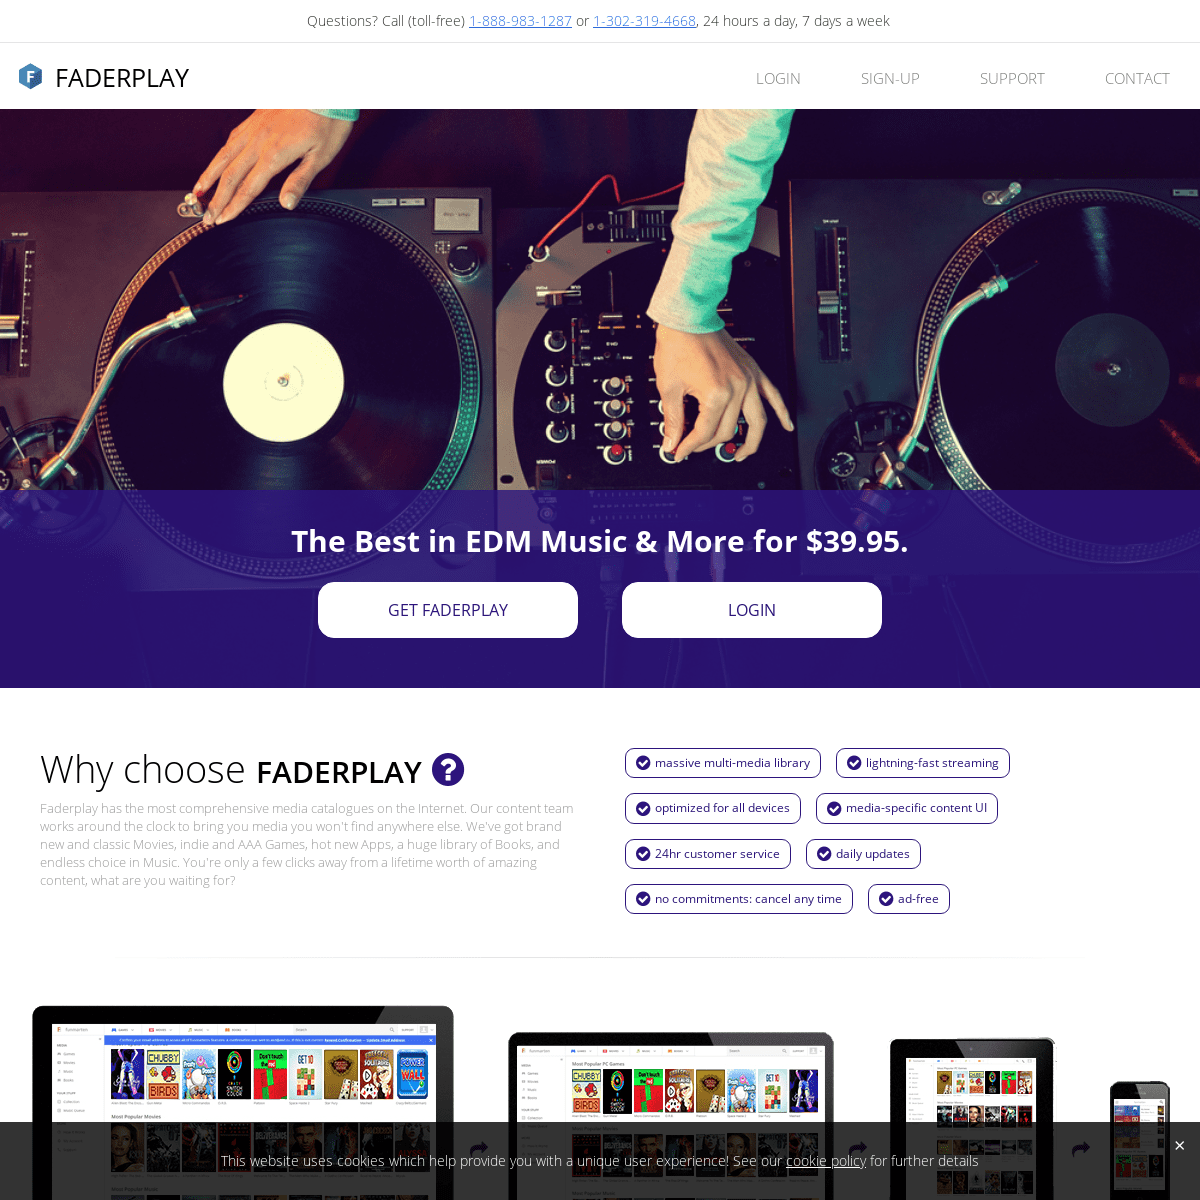 A complete backup of faderplay.com